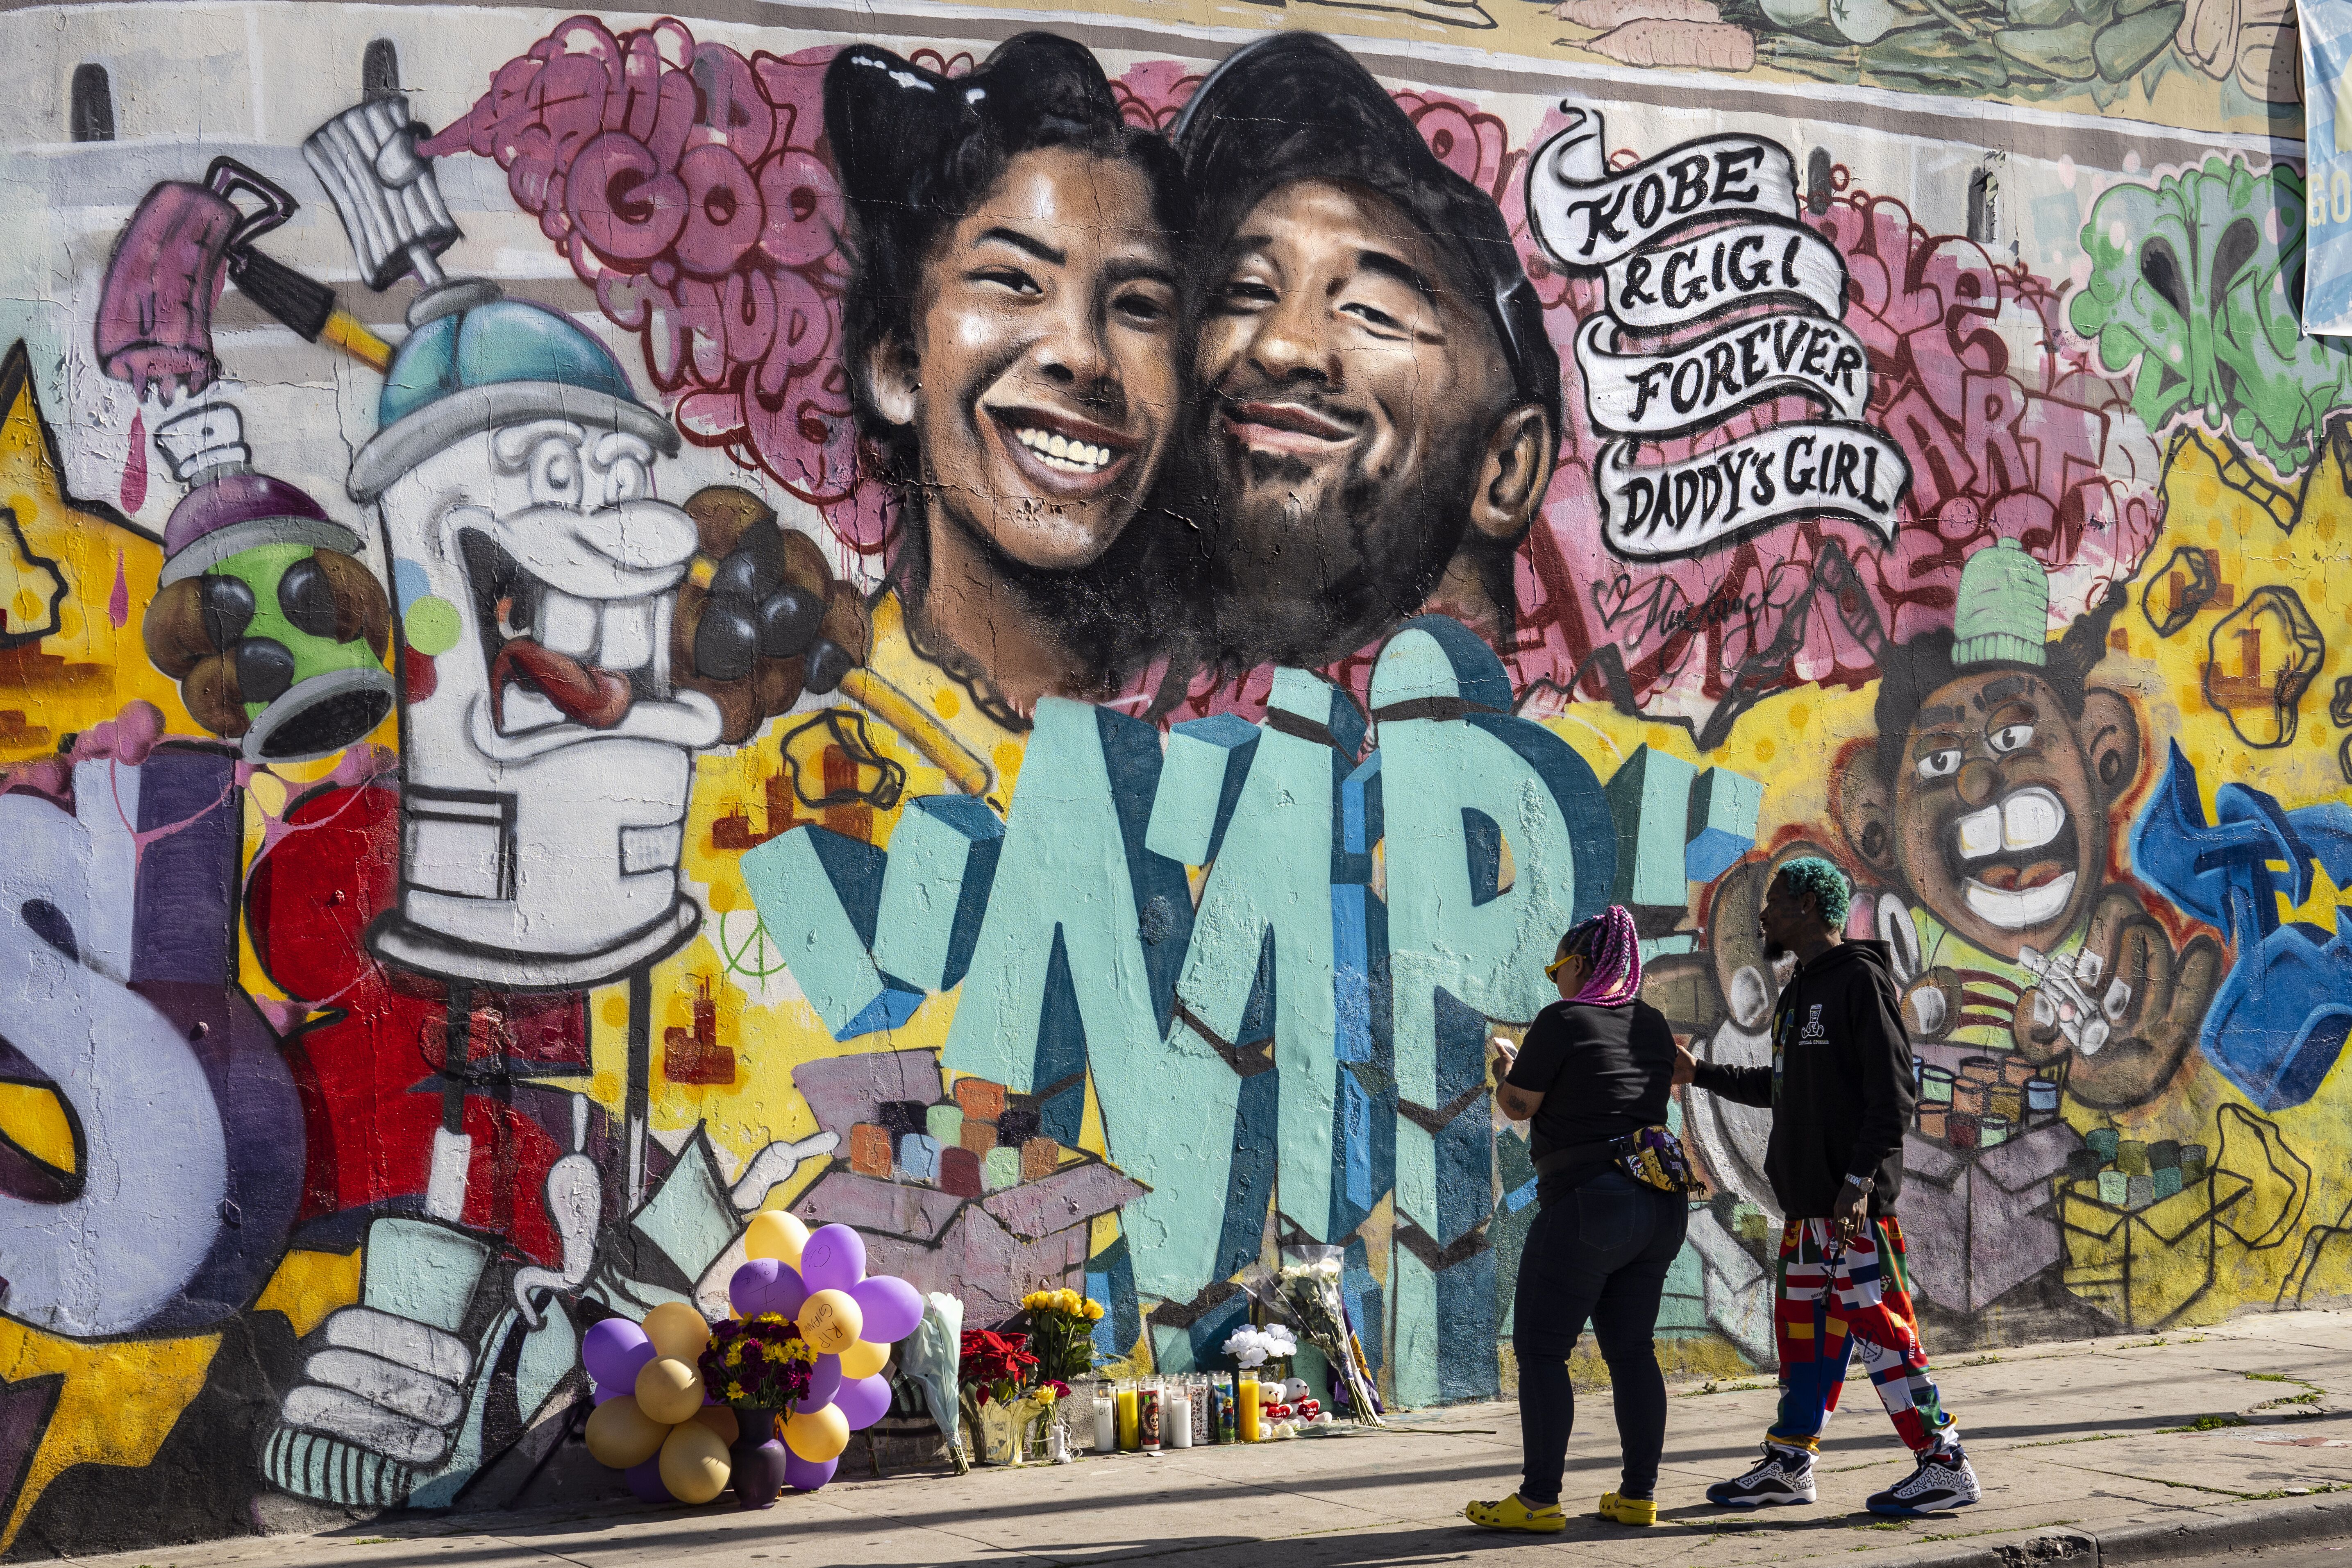 A mural painted by  a mural by the artists Muck Rock and Mr79lts as a tribute to Kobe Bryant and his daughter Gianna/ Source: Getty Images